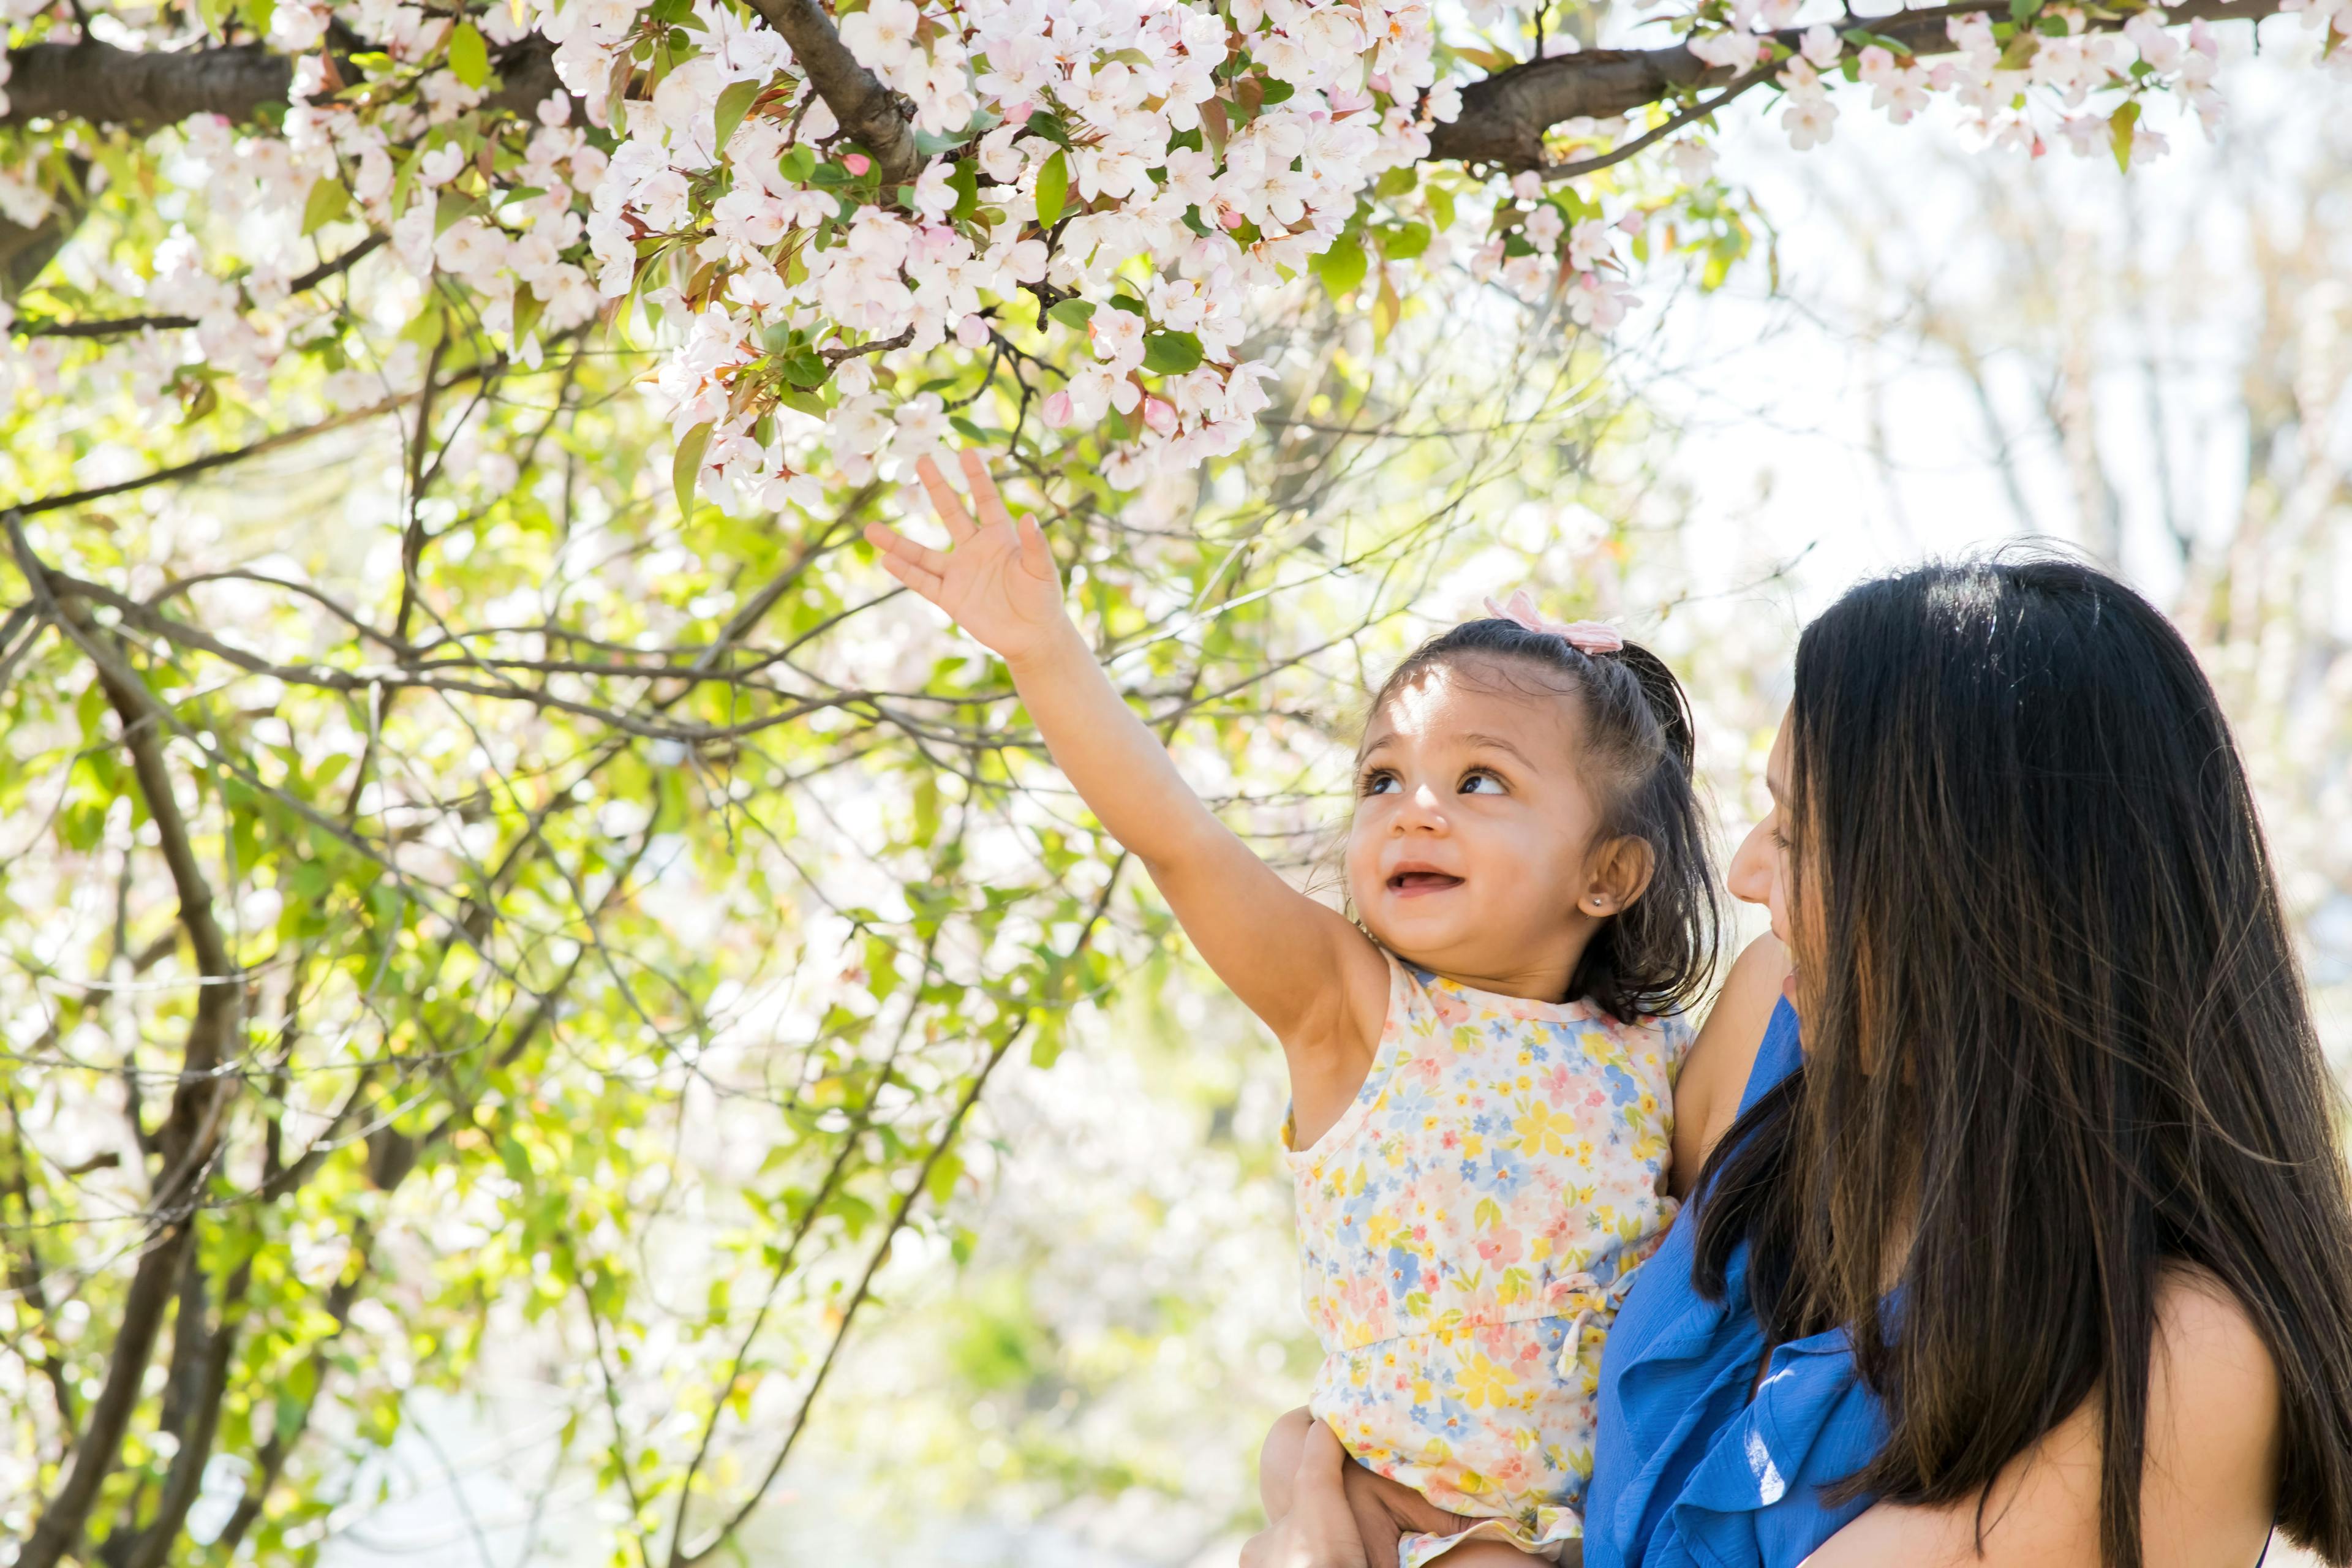 A young girl reaching for cherry blossoms while being held by an adult.